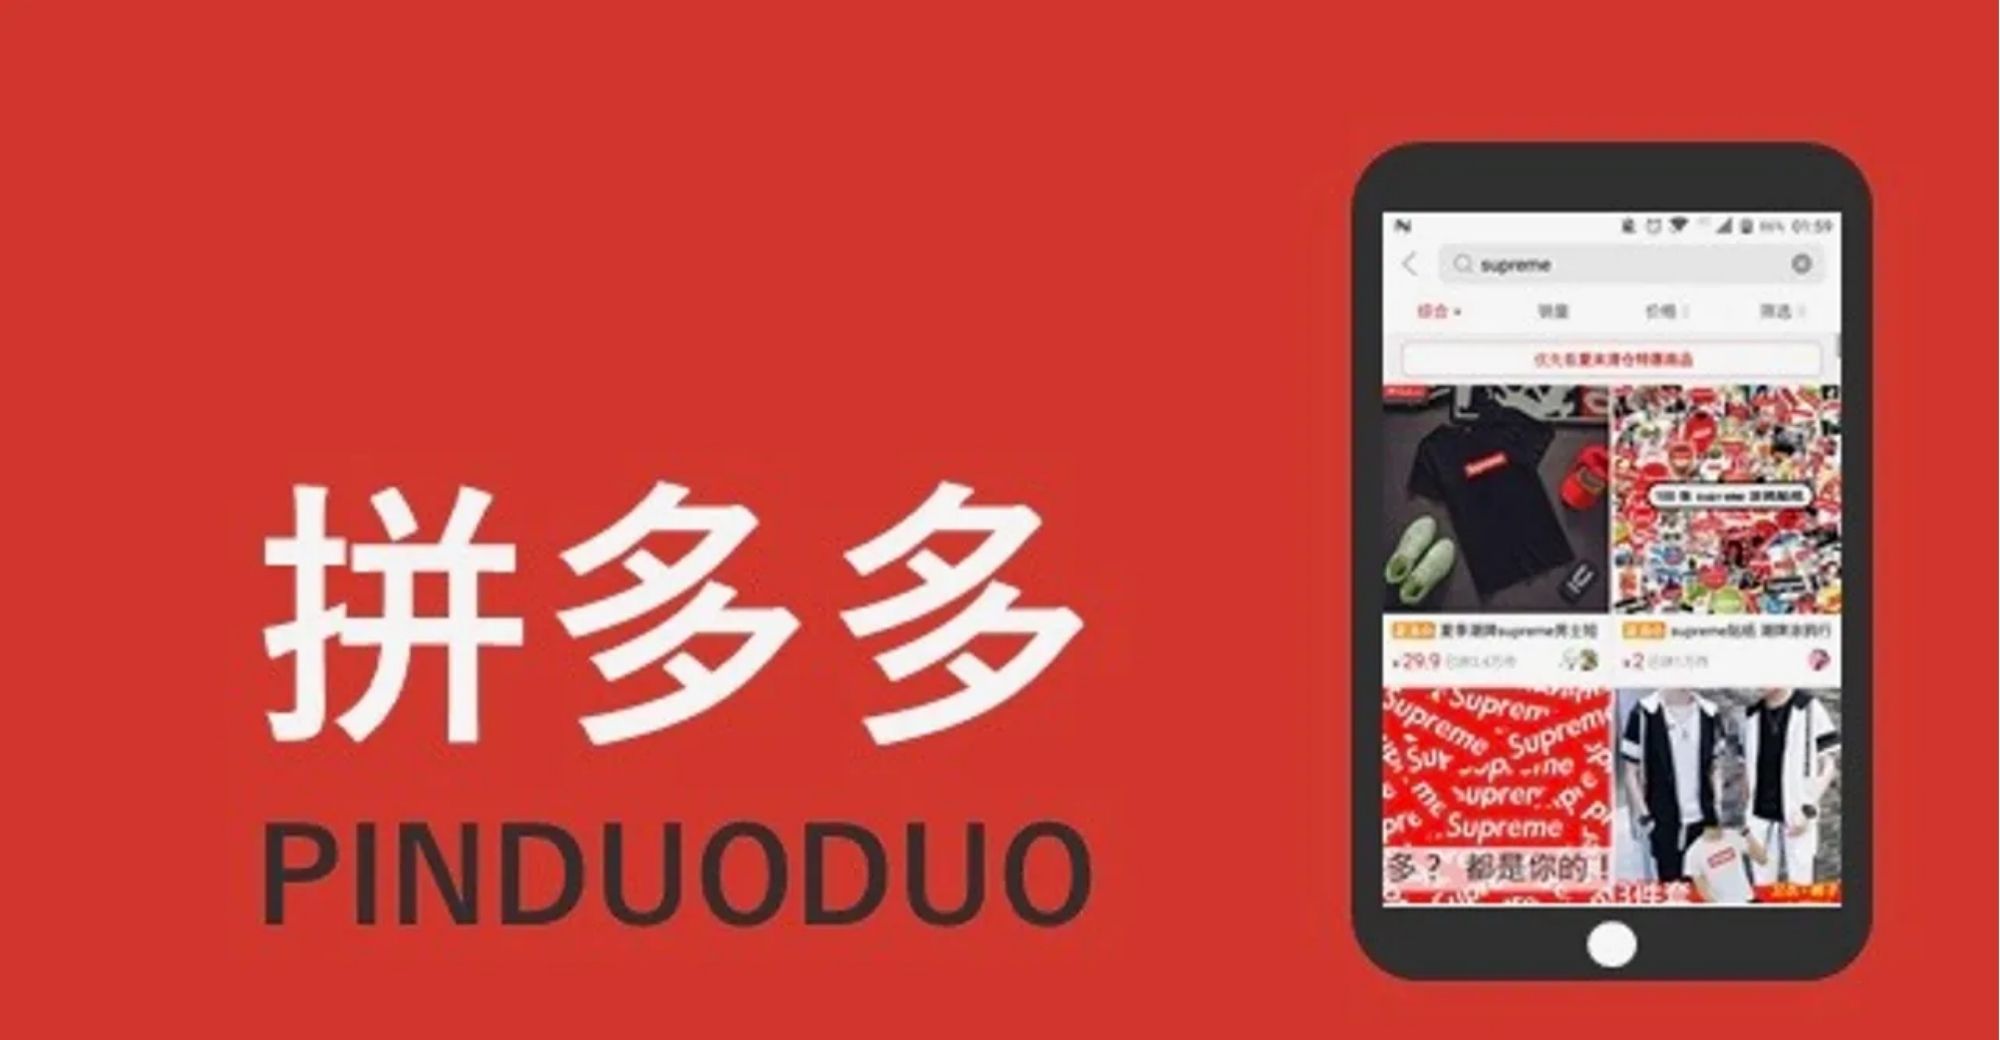 Pinduoduo Q3 Financial Figures Exceed Market Expectations 